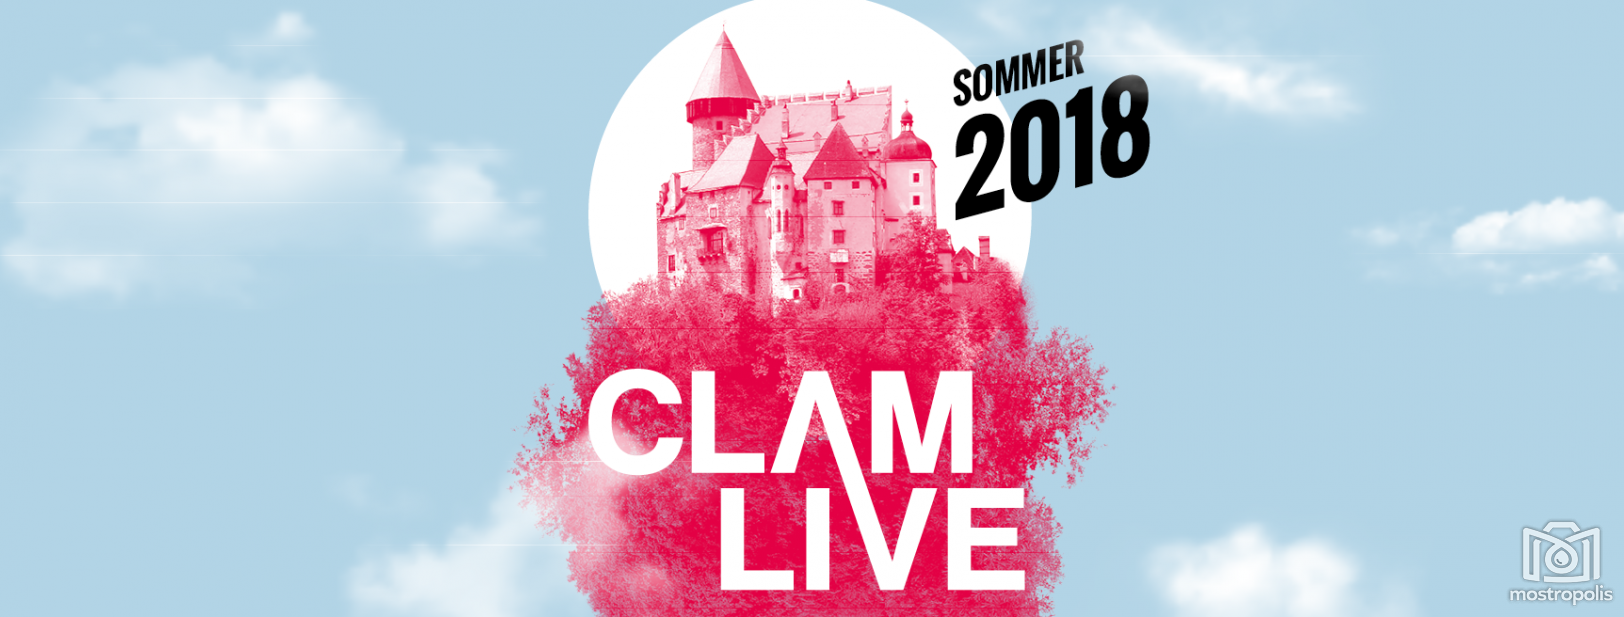 06-00 CLAM live 2018.png